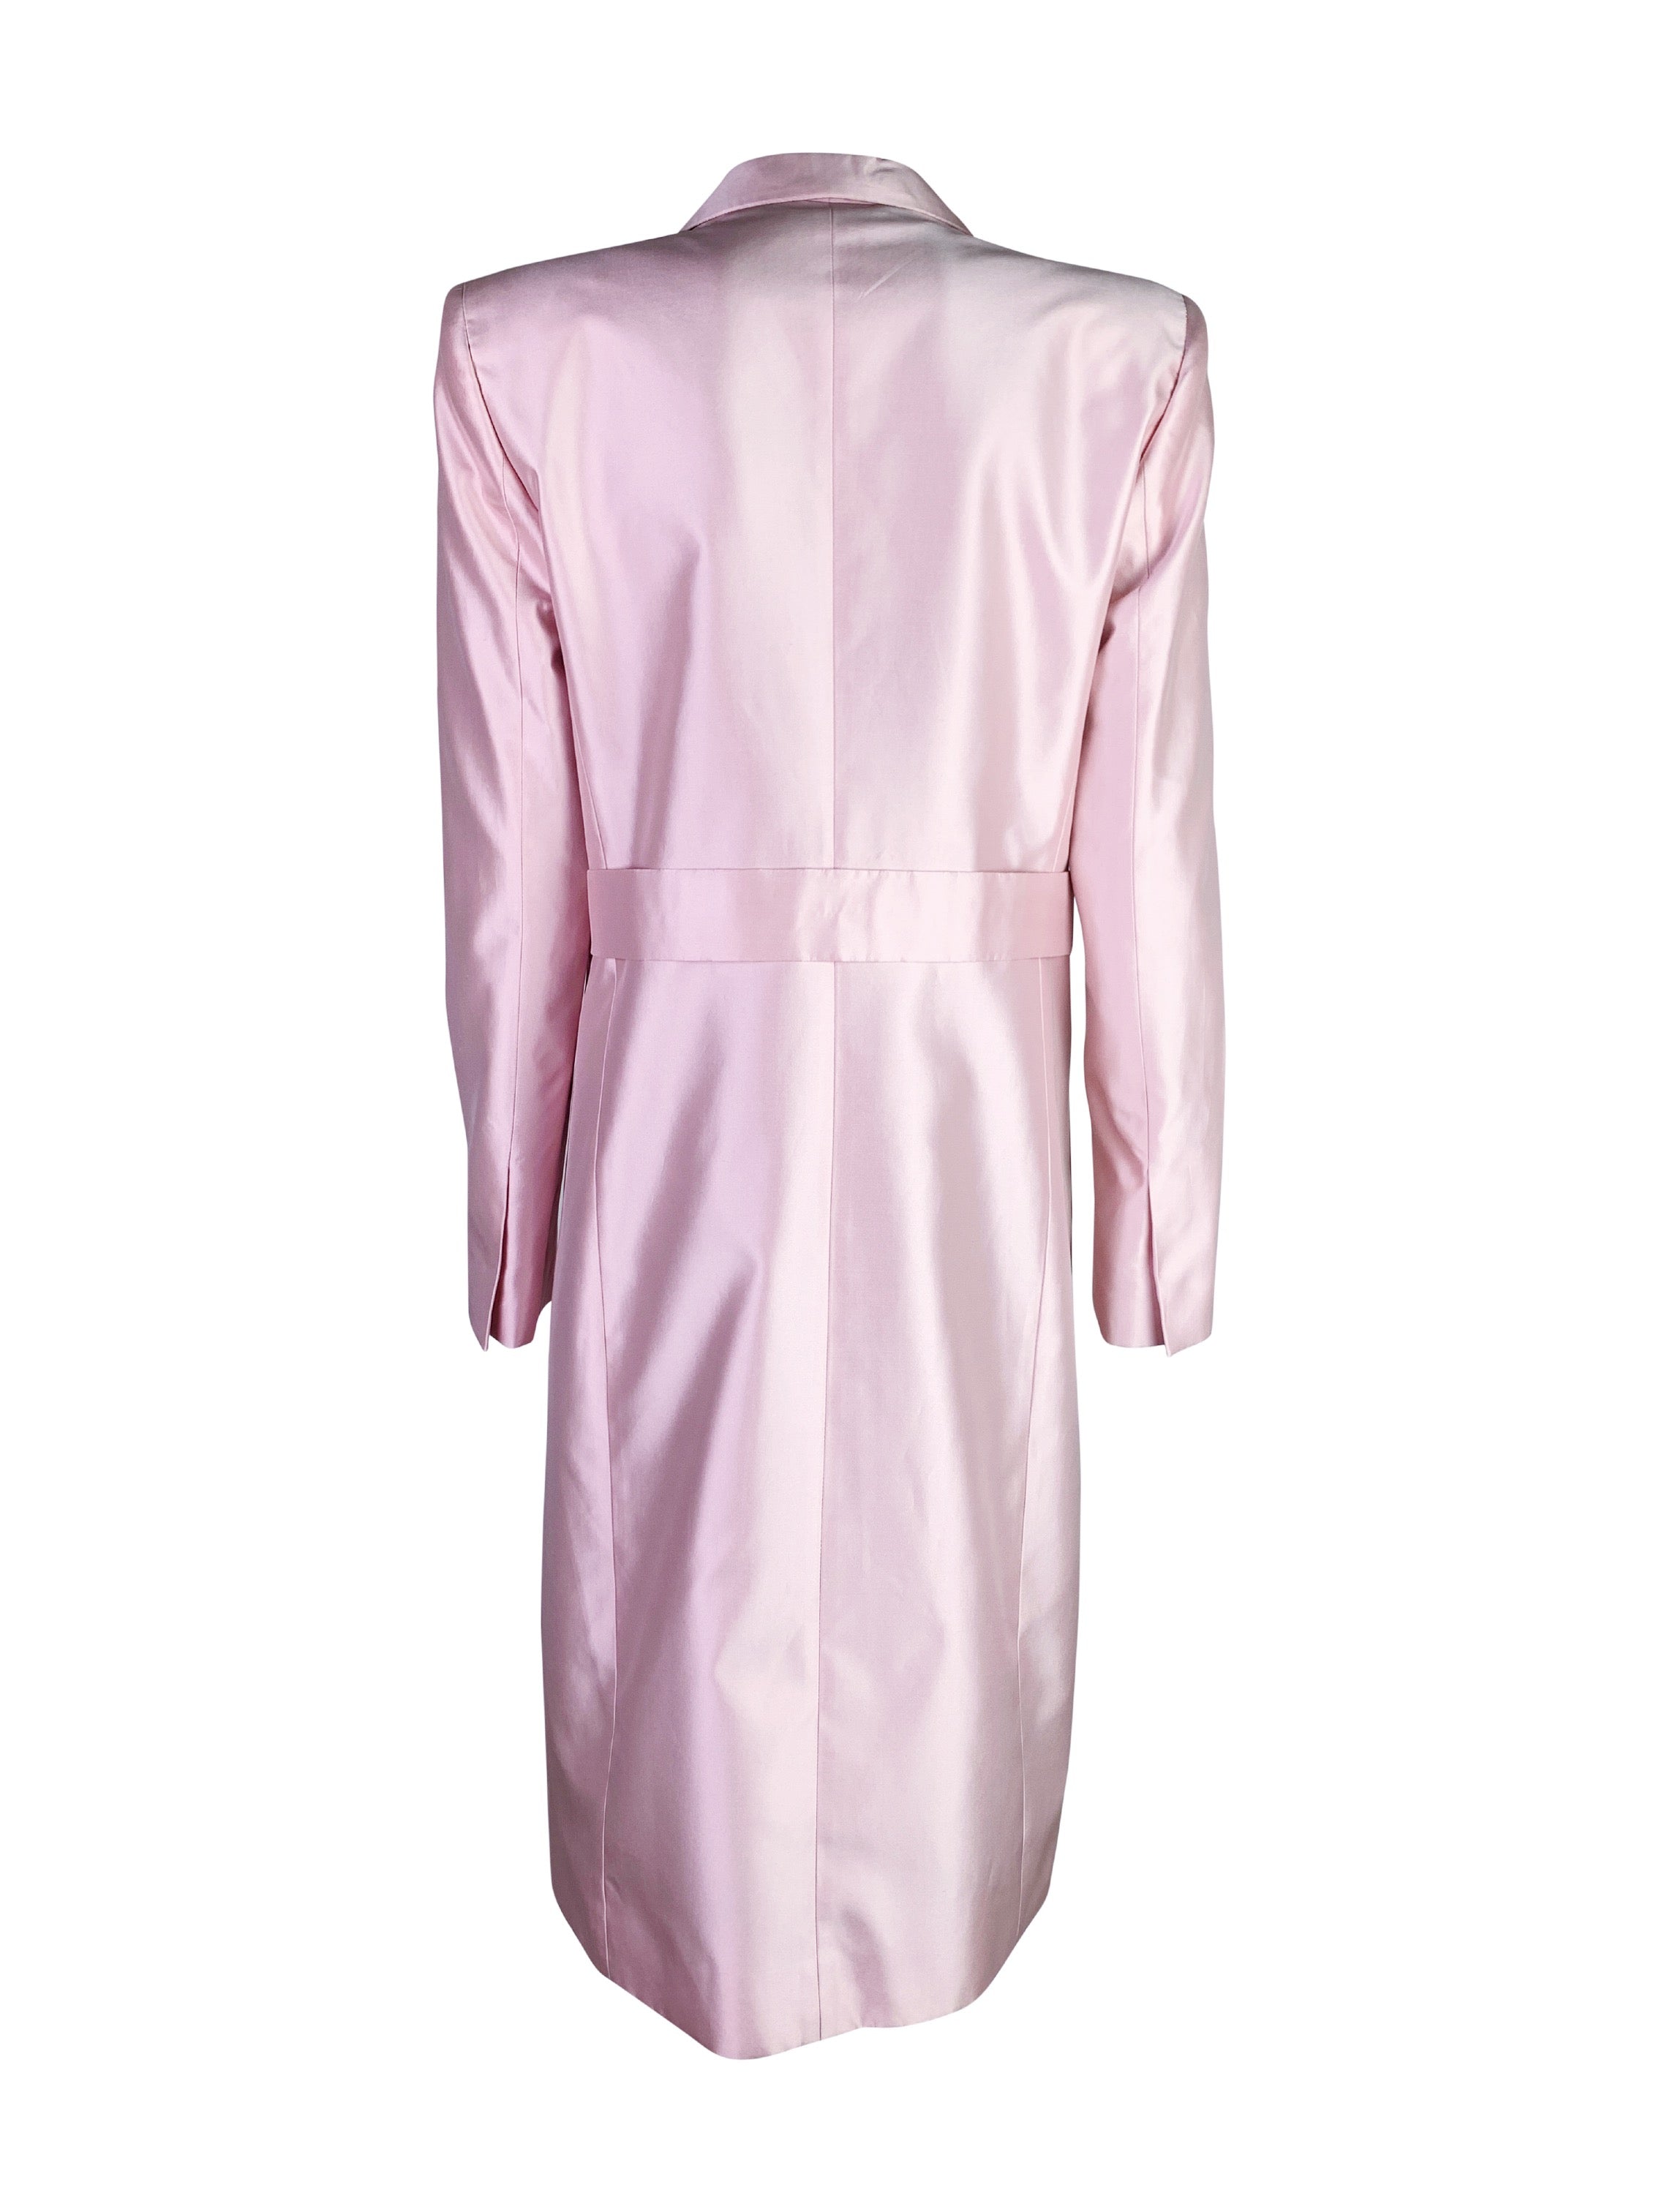 Gucci Spring 1998 Silk Coat in Pink